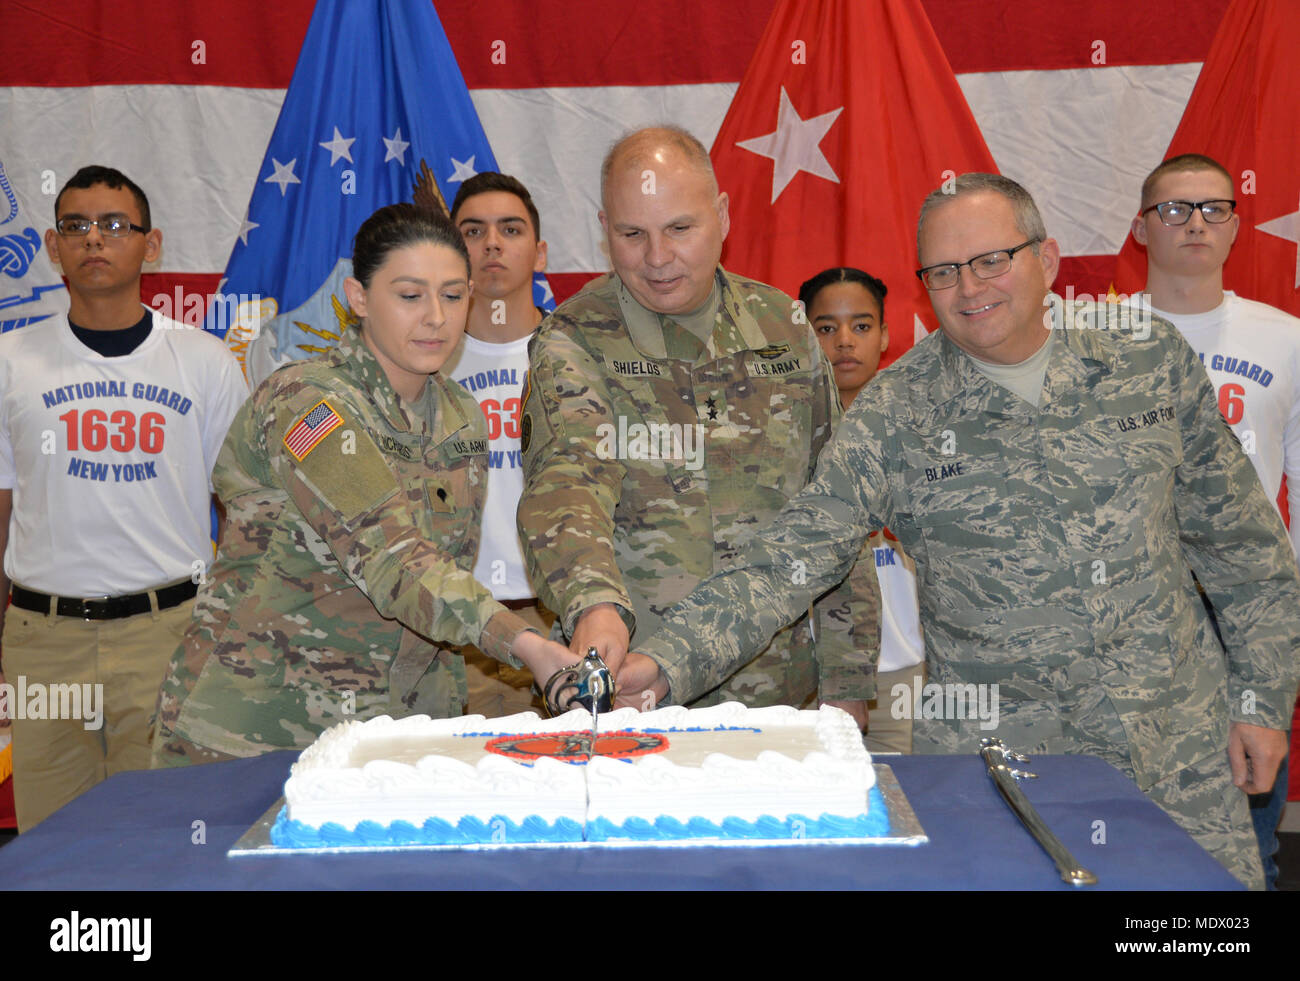 Maj. Gen. Raymond Shields, commander of the New York Army National Guard (middle) joins Air National Guard Chief Master Sgt. Michael Blake, age 58 the oldest  National Guard members present (right) and Army National Guard Spec. Jade Richards, age 19, one of the youngest members of the New York National Guard in cutting a cake in celebration of the National Guard’s 381th birthday at New York National Guard headquarters  in Latham, N.Y. on December, 13 2017. The National Guard was established in 1636 and is the oldest military force in the Department of Defense.  (U.S. Army National Guard photo  Stock Photo